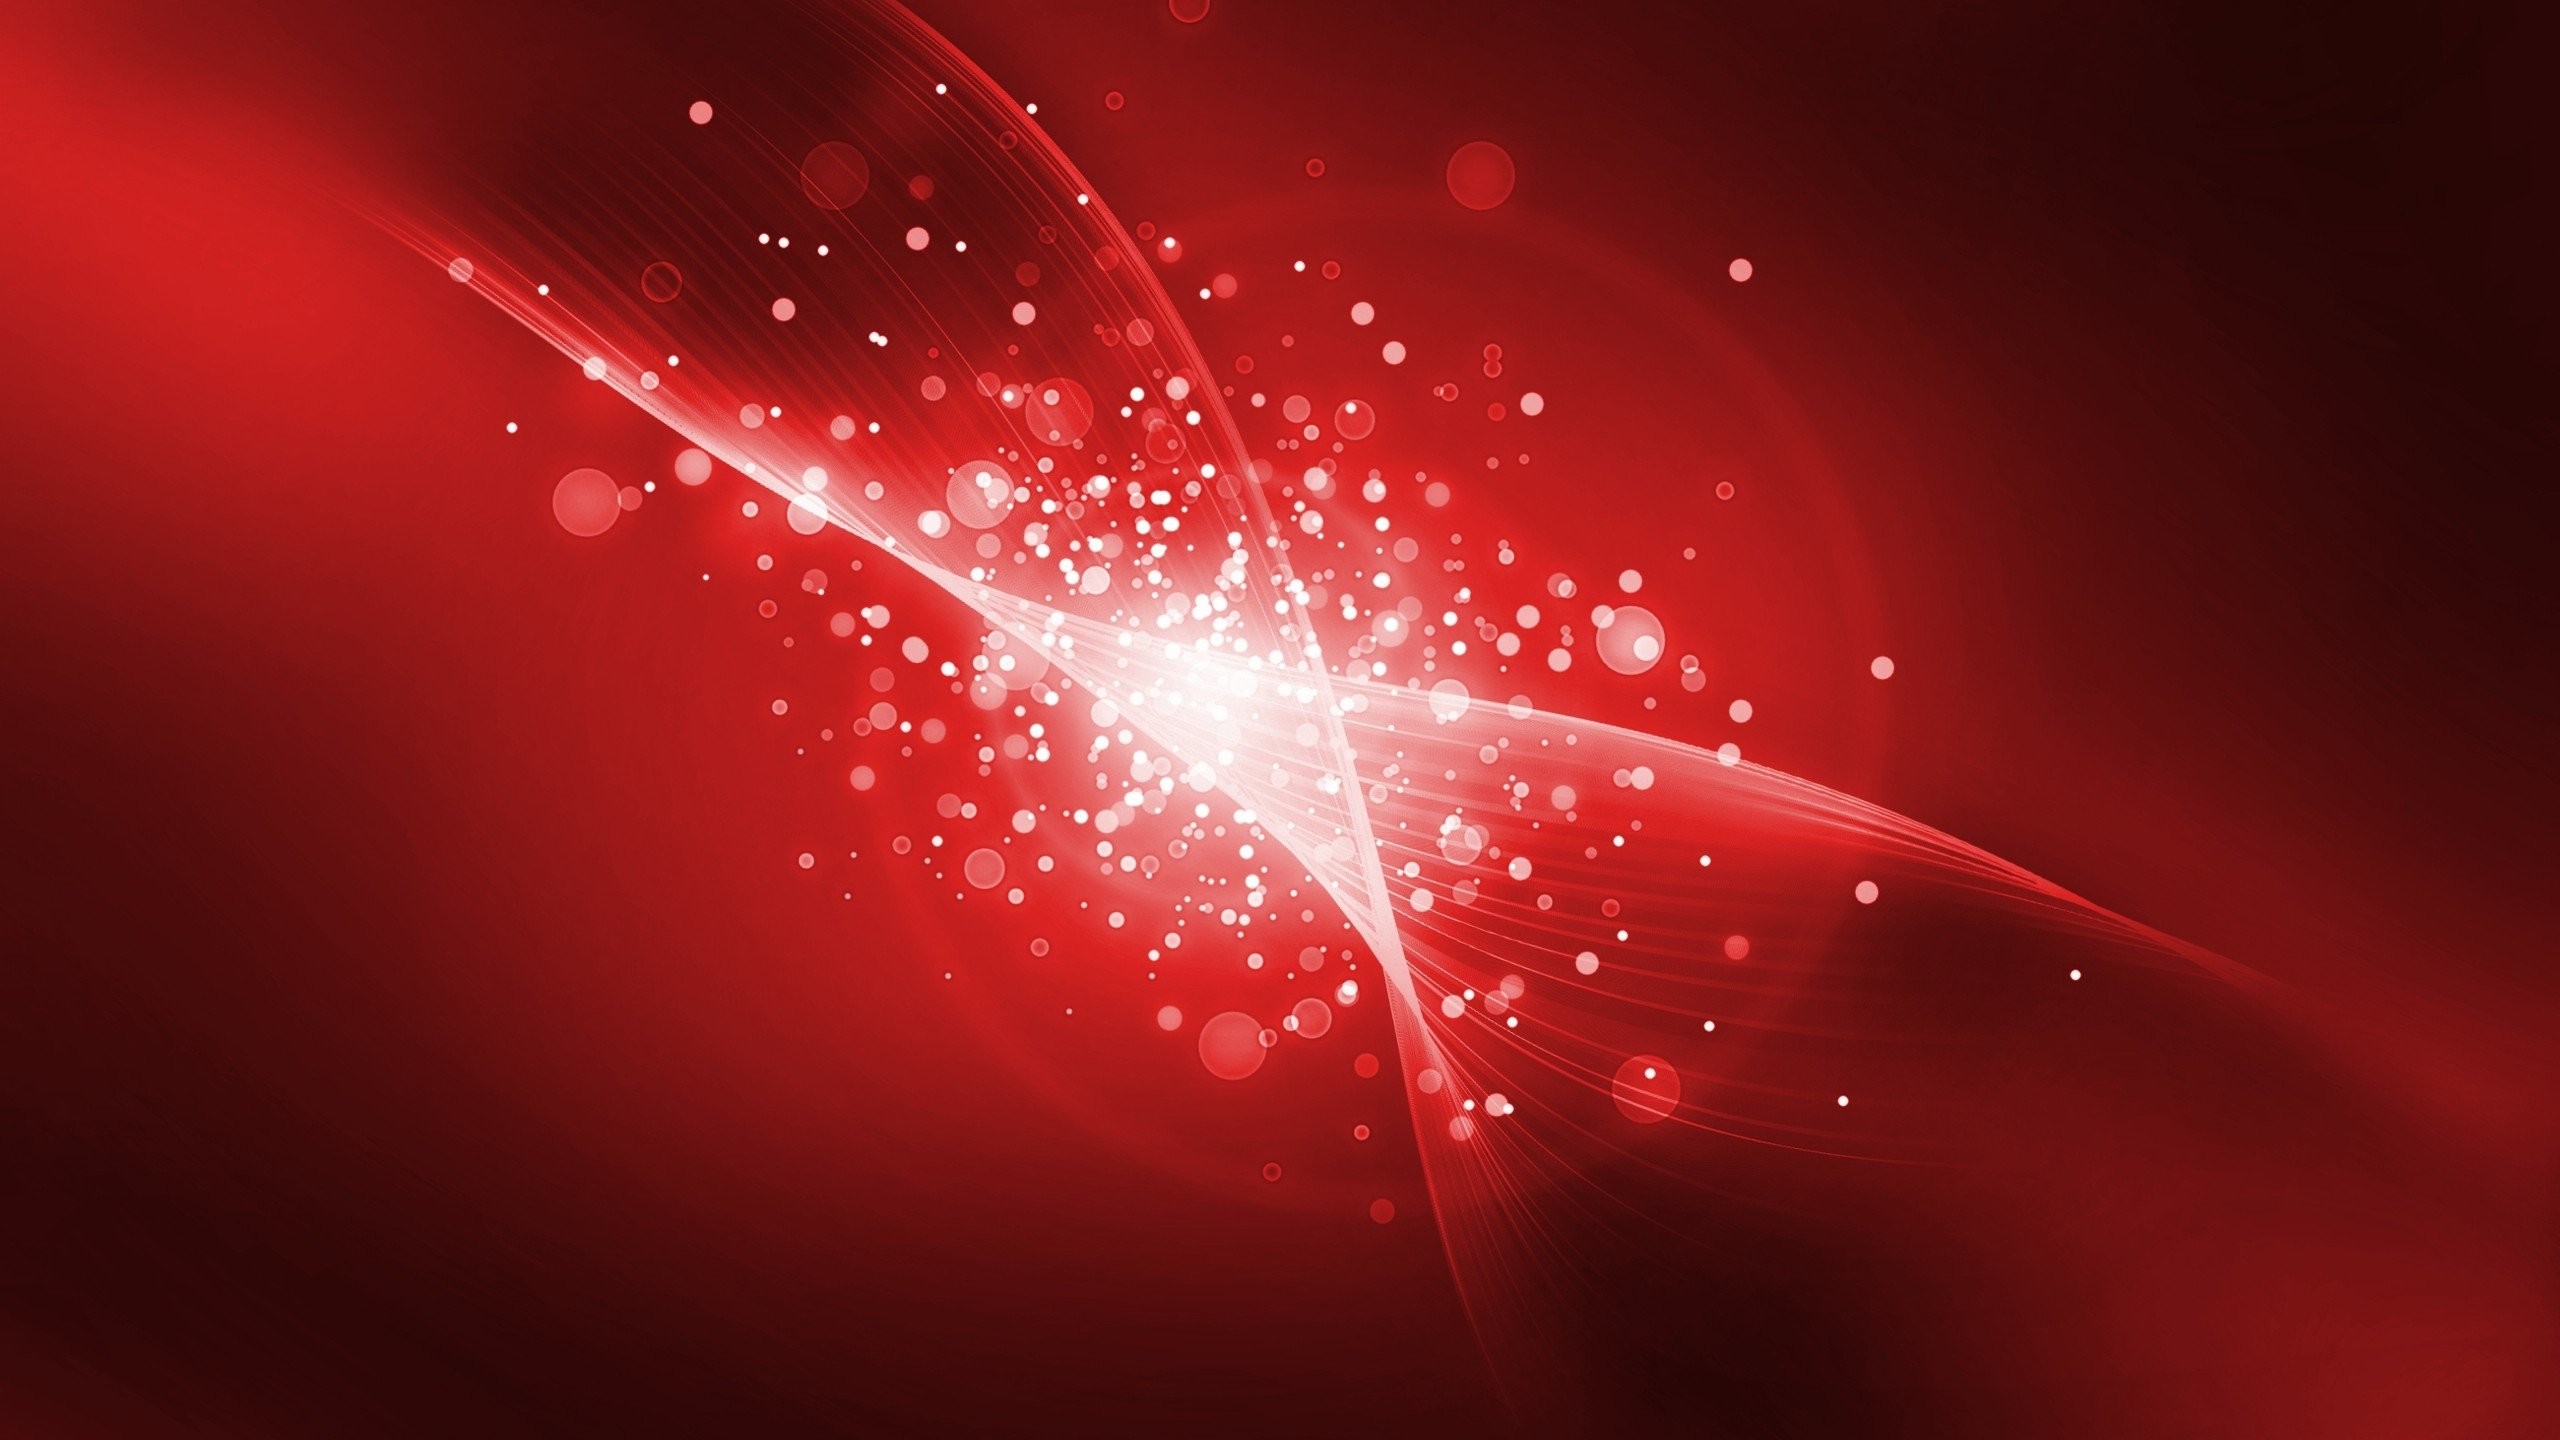 2560x1440 light red background wallpaper - photo #5. So You Want A Background Huh  HTML Goodies